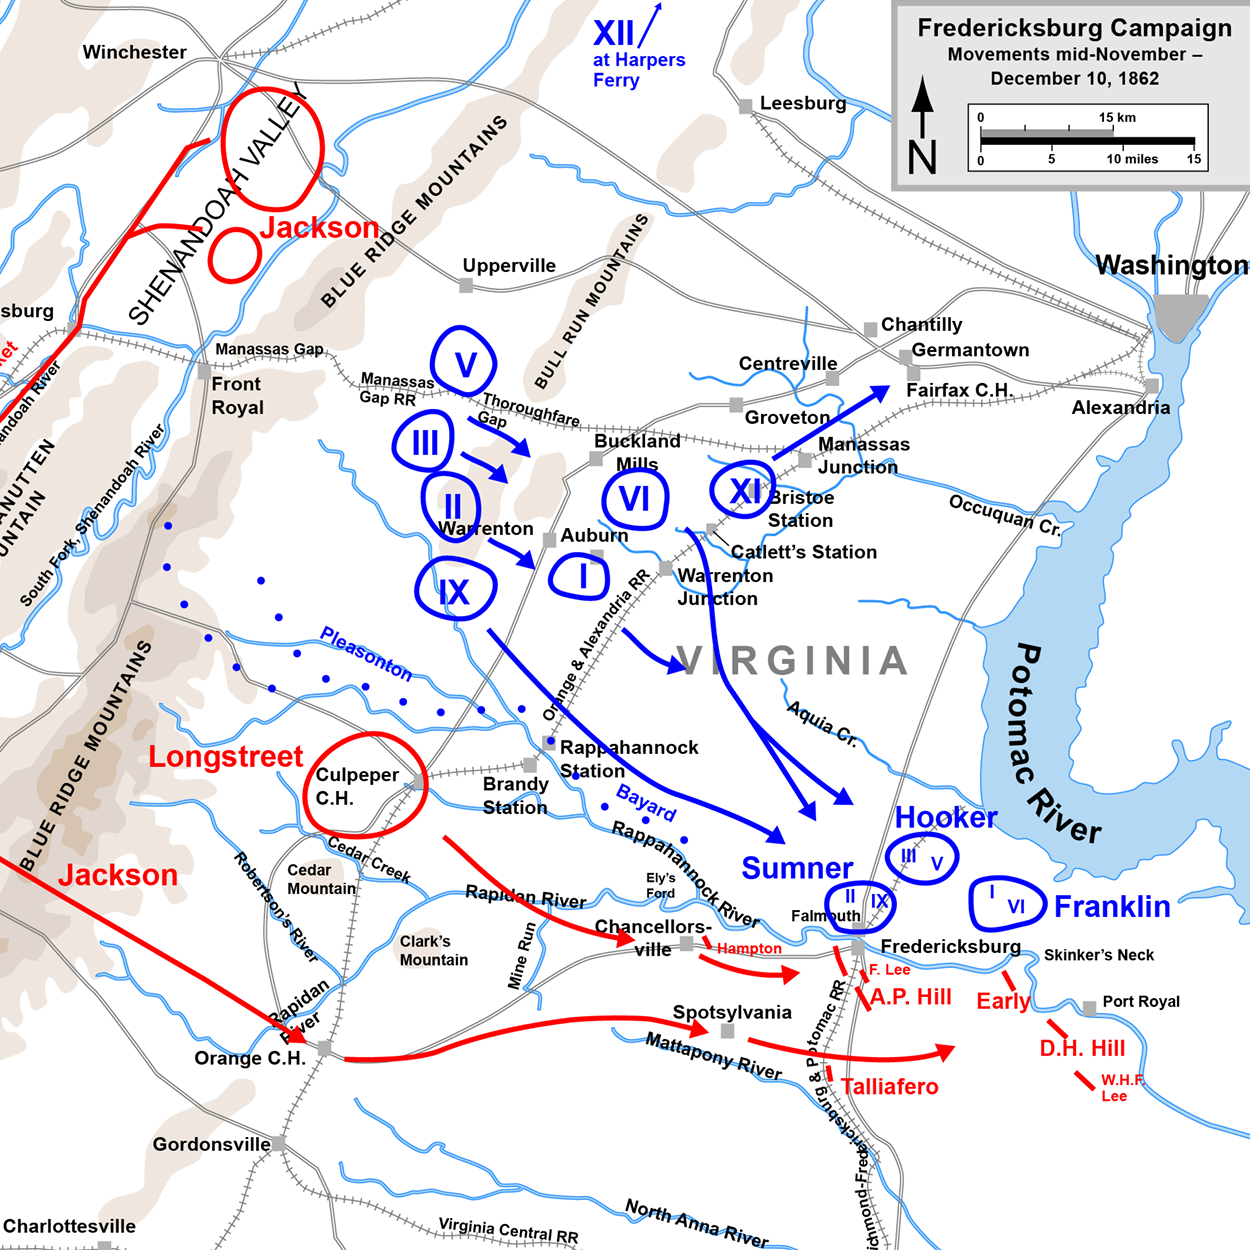 Map of the Initial Movements of the Fredericksburg Campaign of the American Civil War by Hal Jespersen